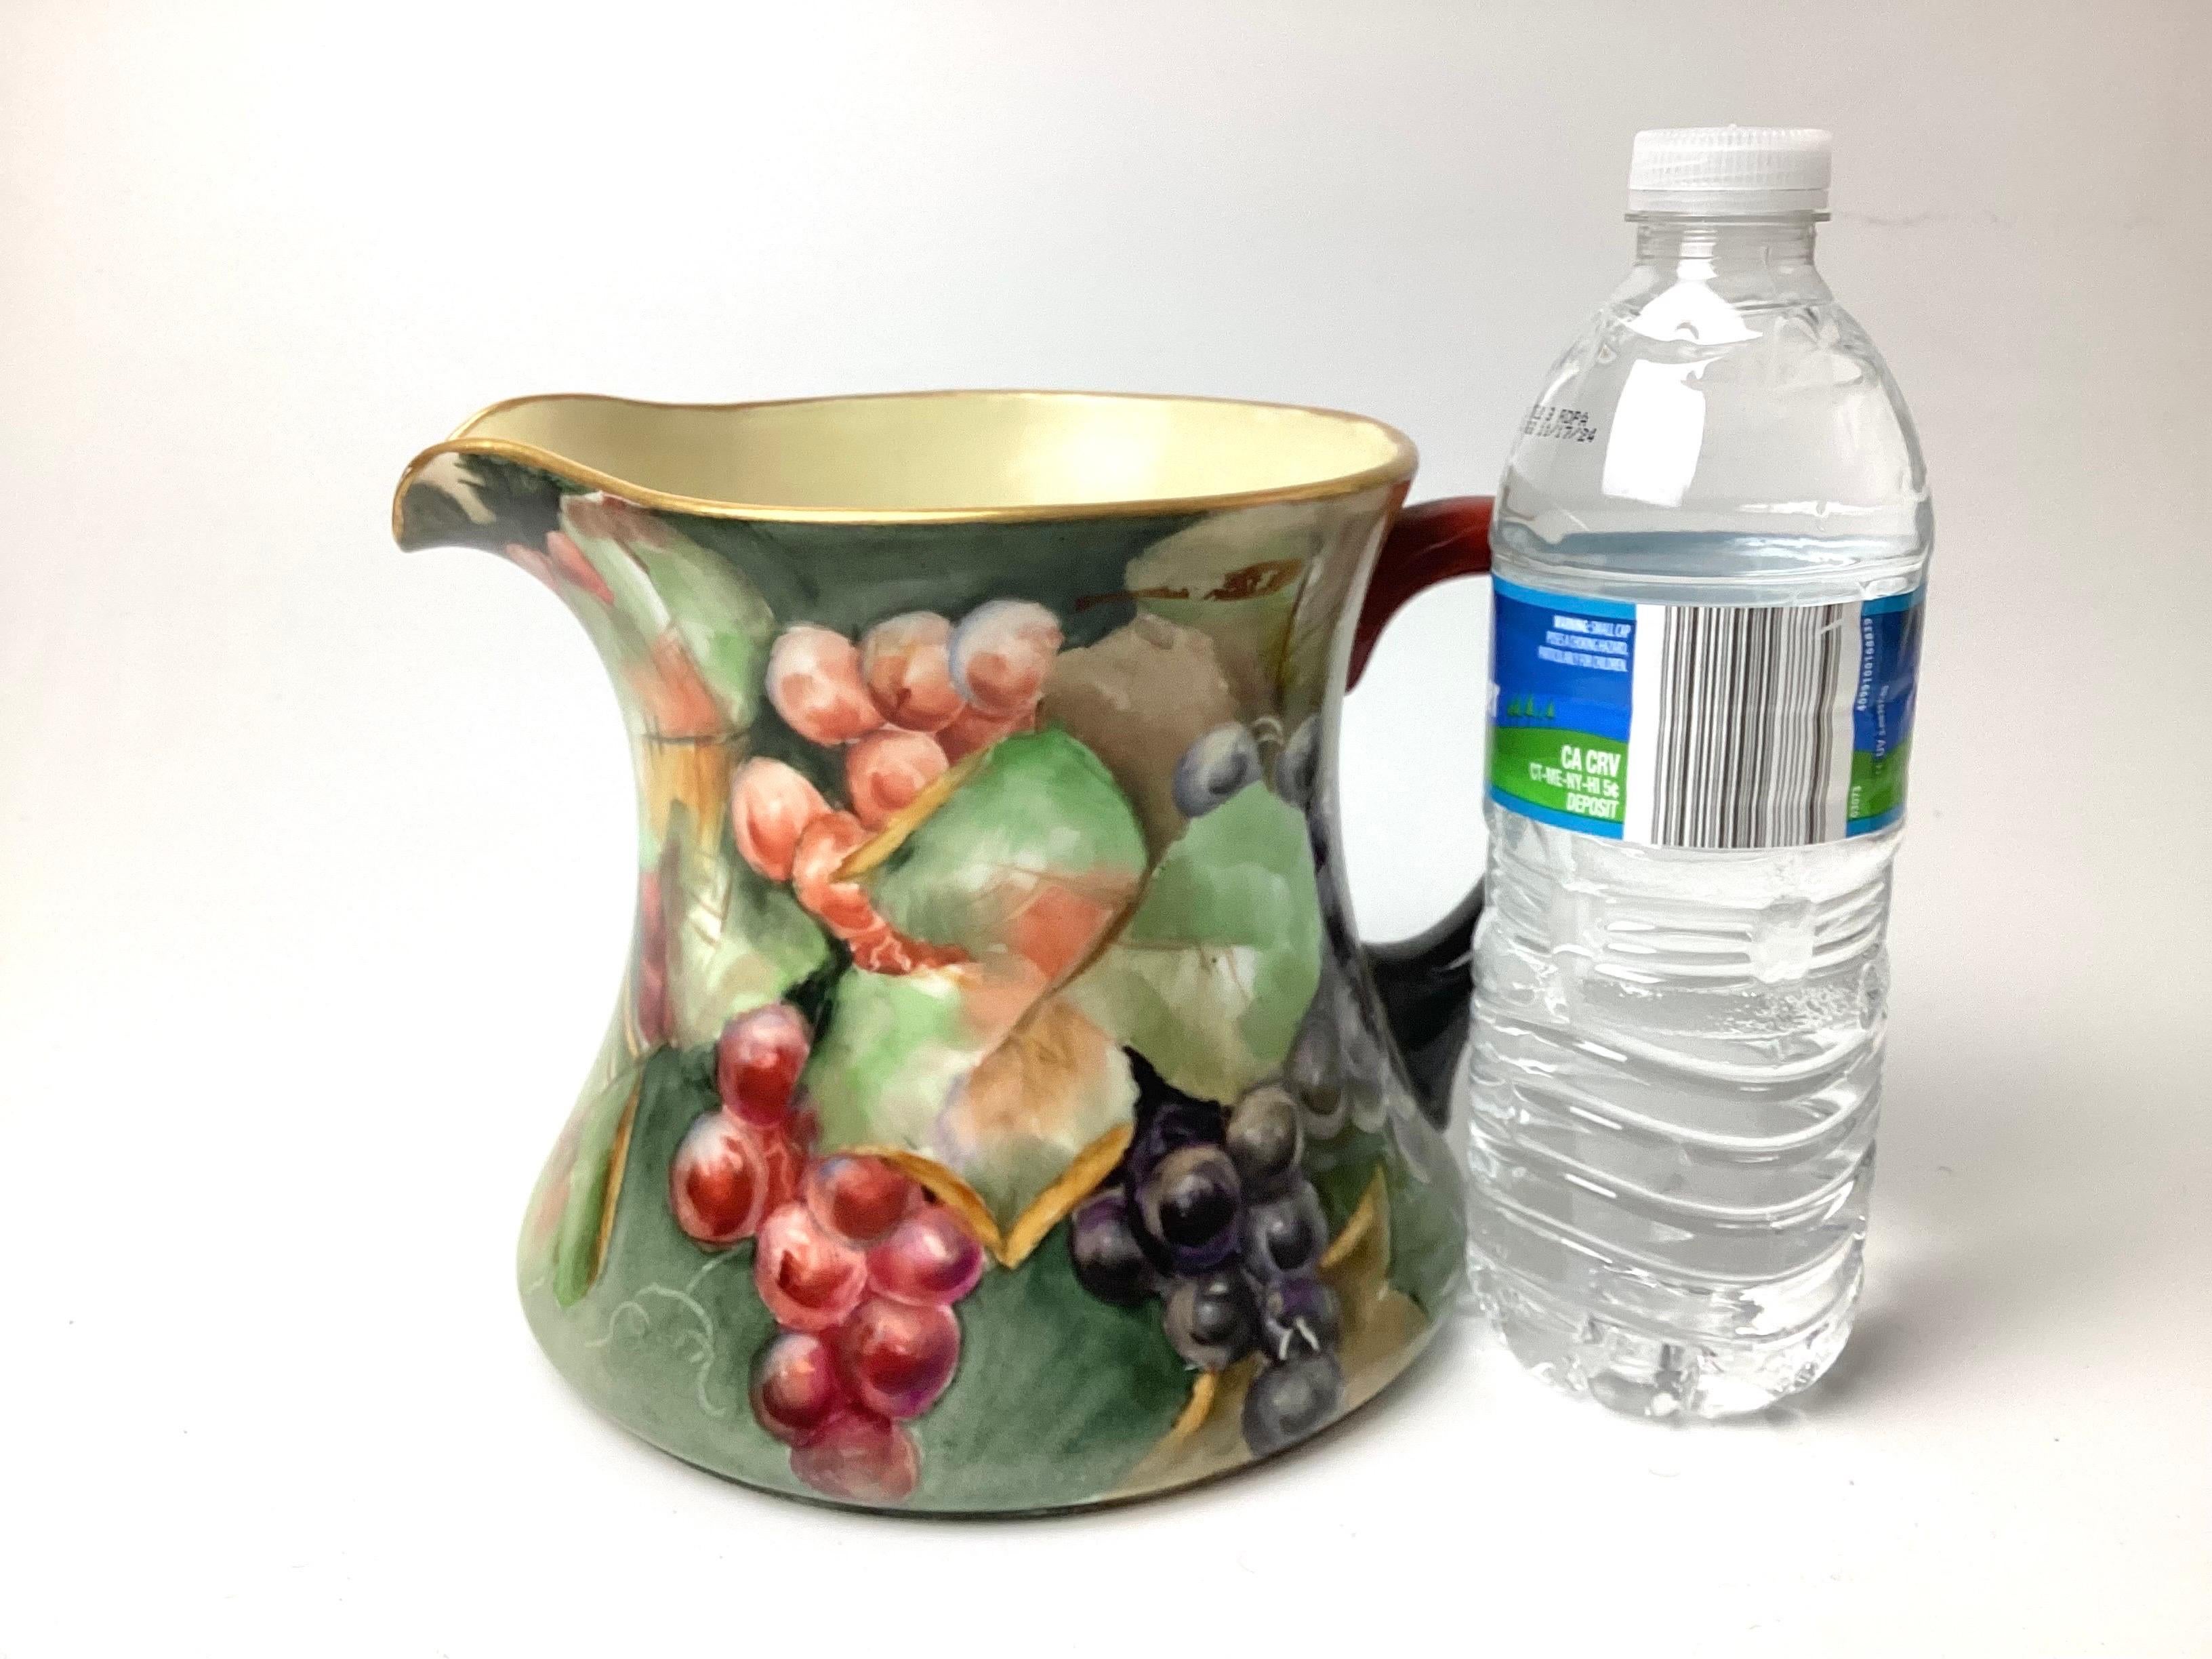 Large Limoges water pitcher hand painted with grapes. Grapes wrap all around the pitcher. Signed with a mark and letters on the bottom along with the Limoges France marking. Wonderfull condition.